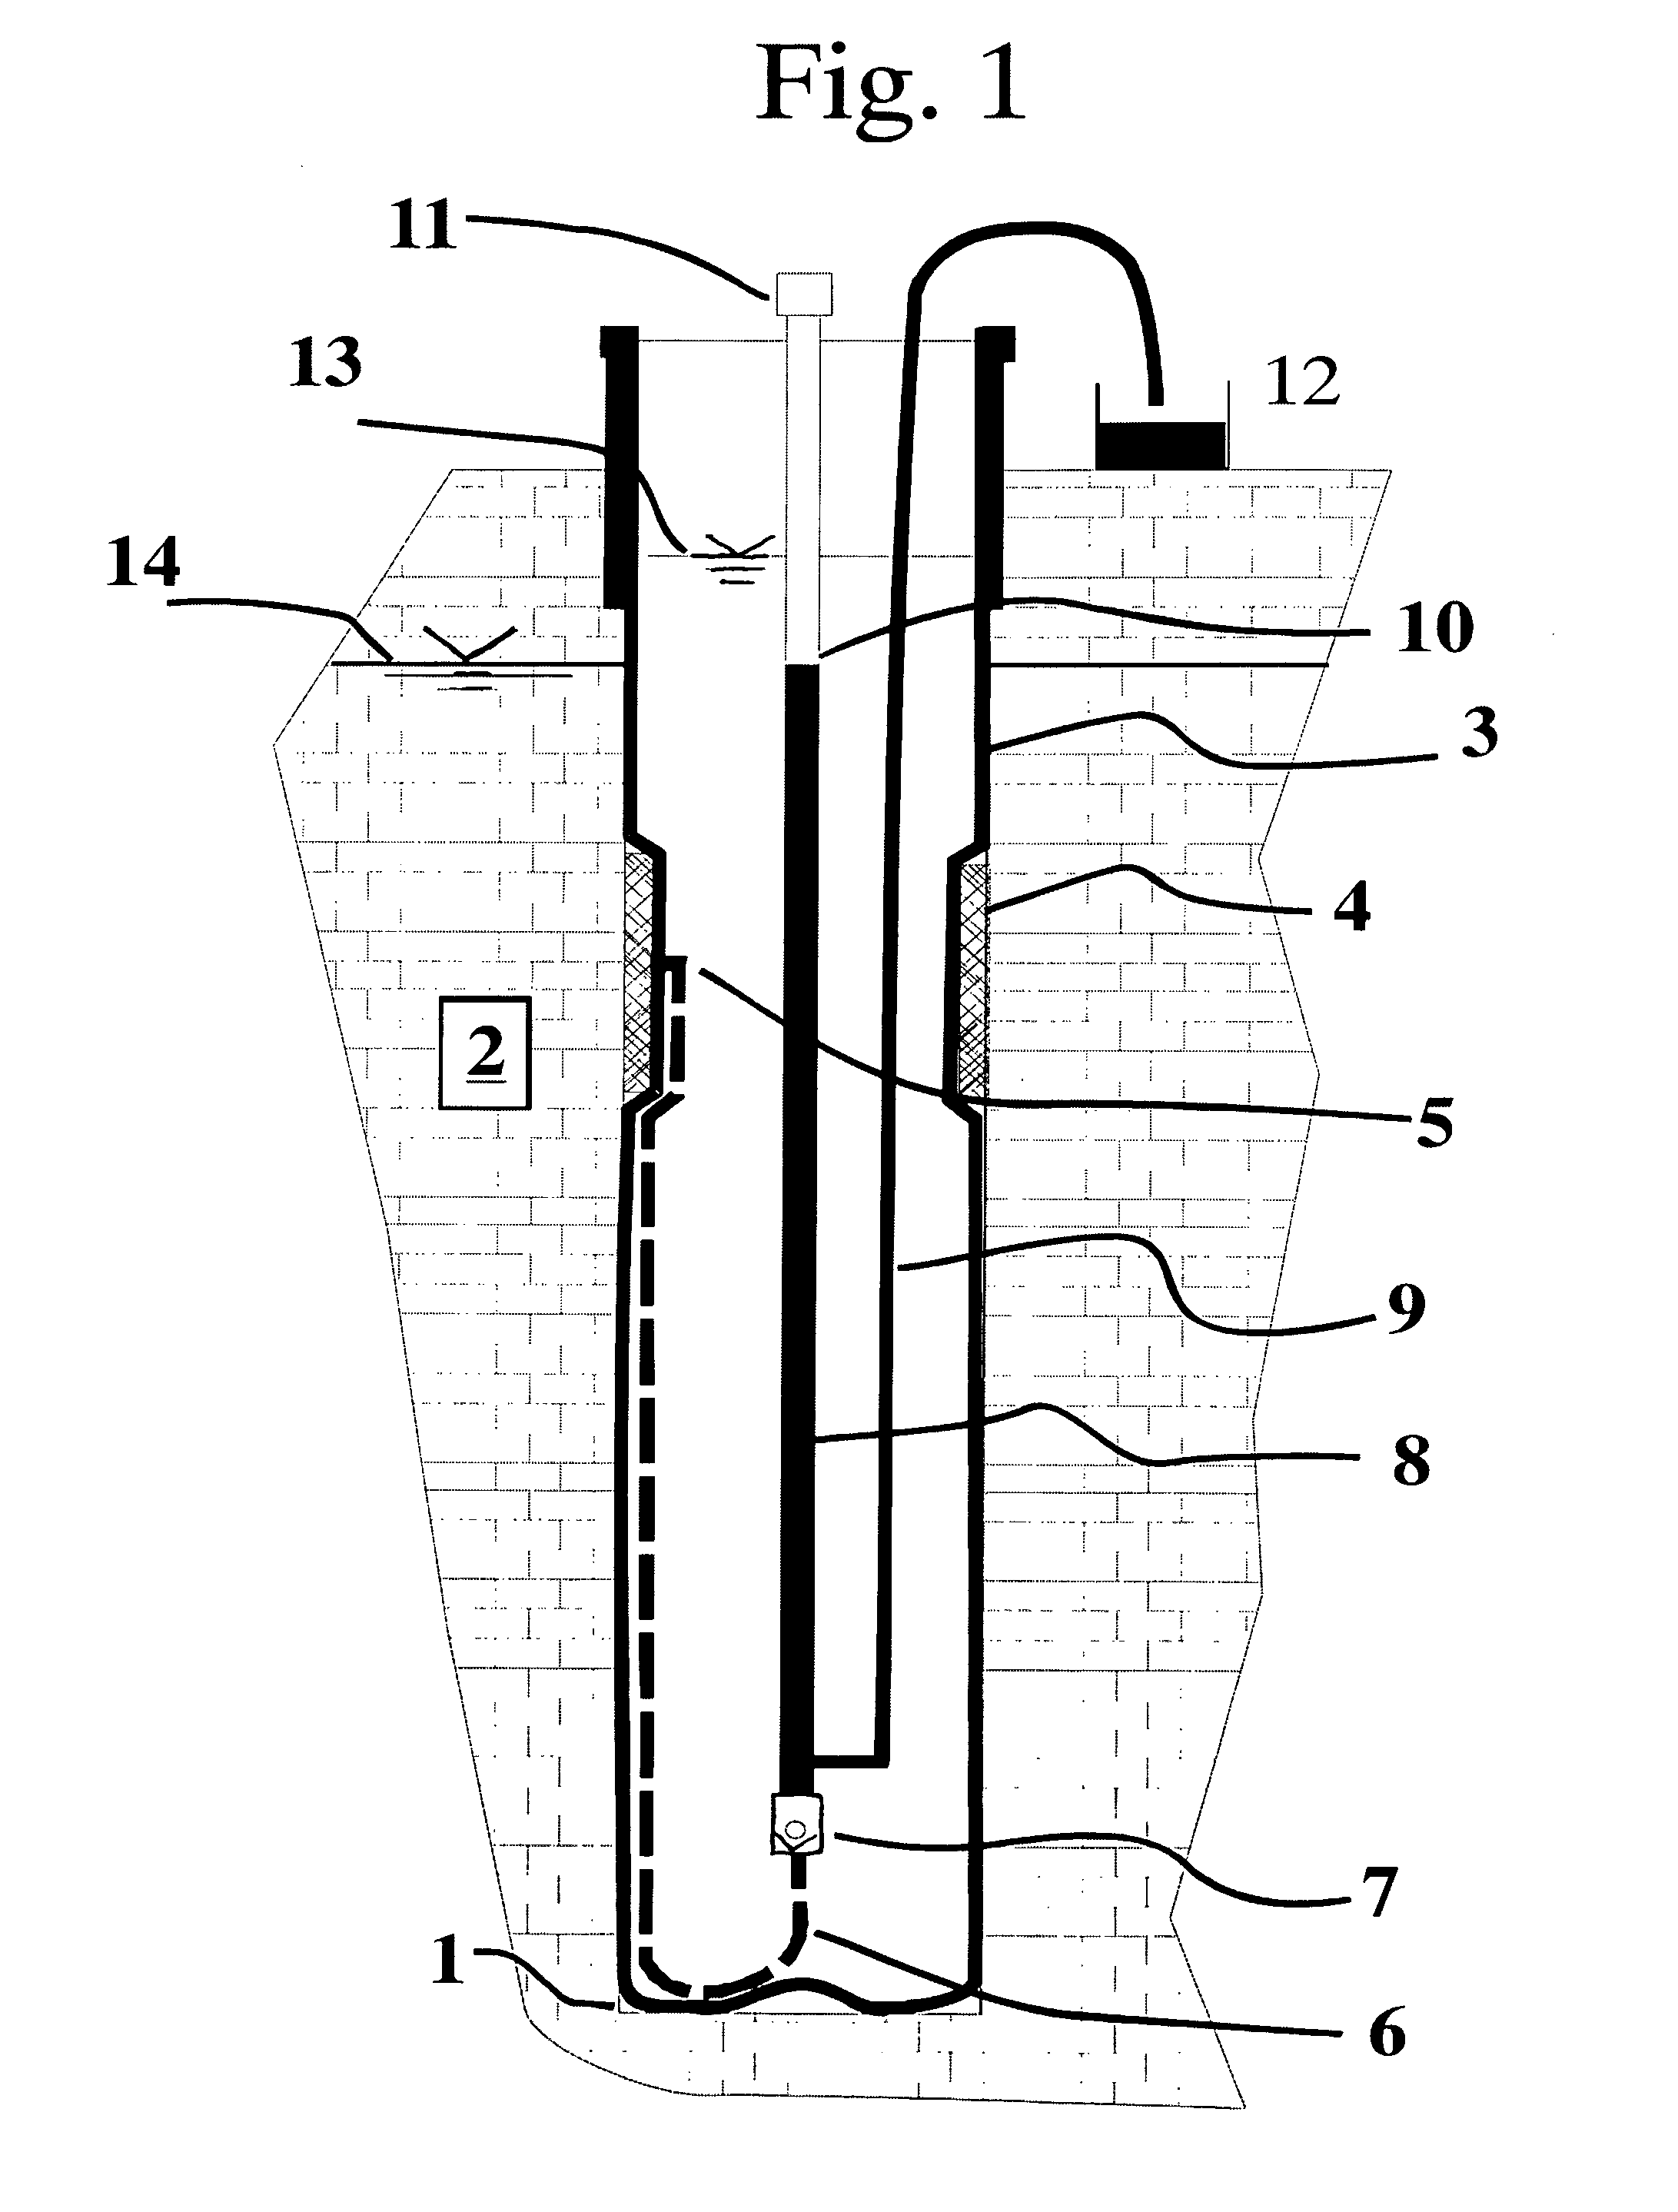 Pore fluid sampling system with diffusion barrier and method of use thereof